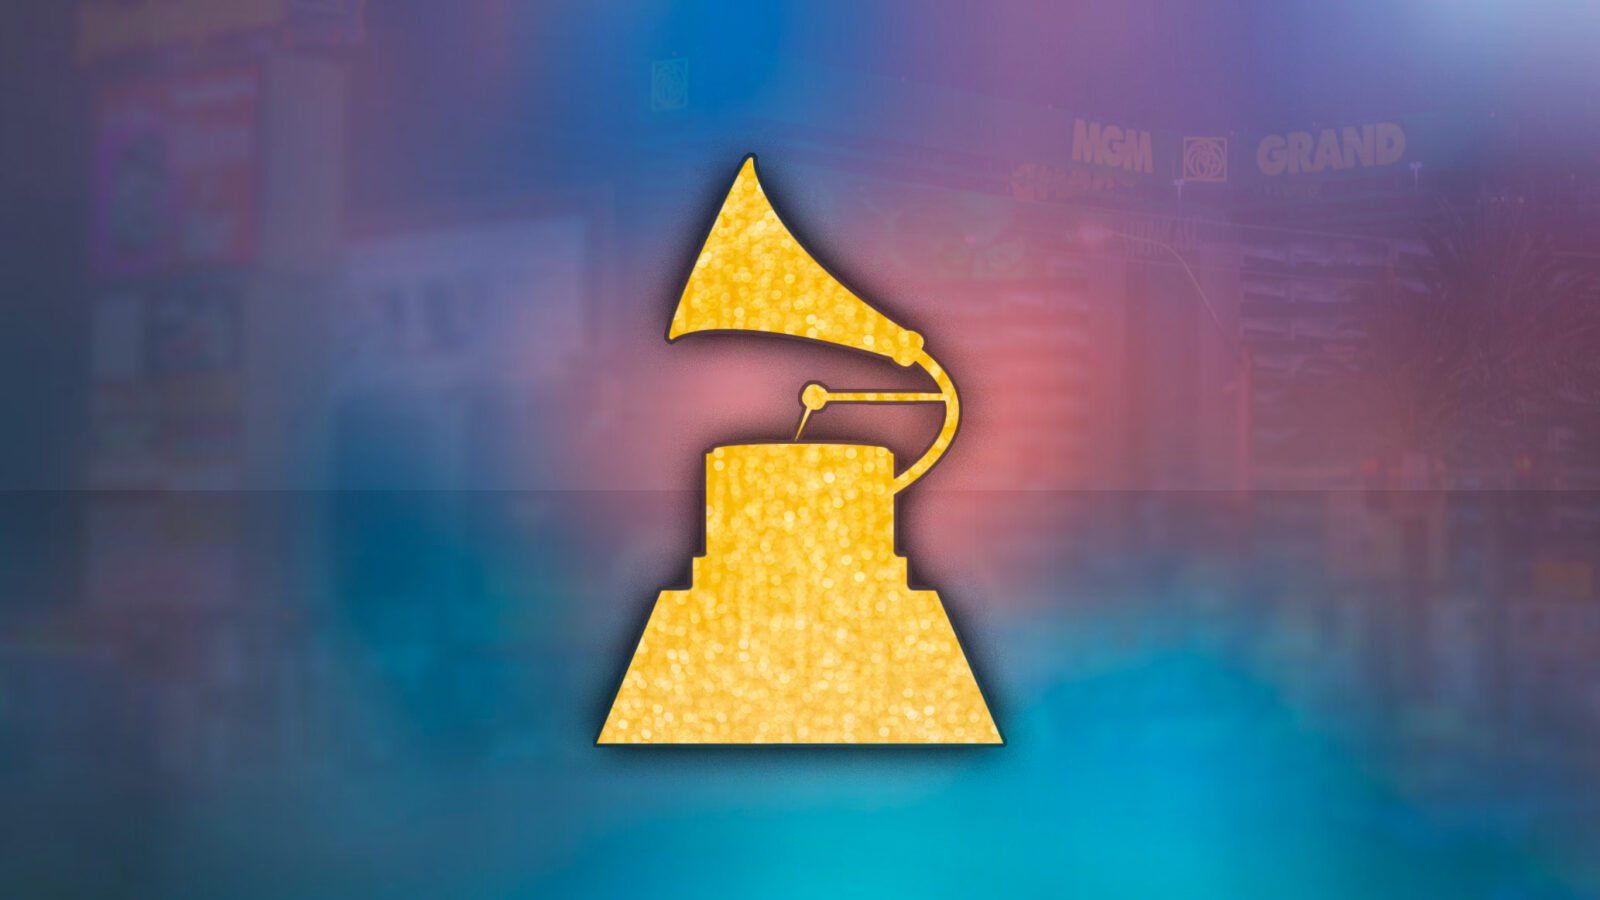 Featured image for “Grammys 2022: See All the Classical+ Nominees (And Winners)”